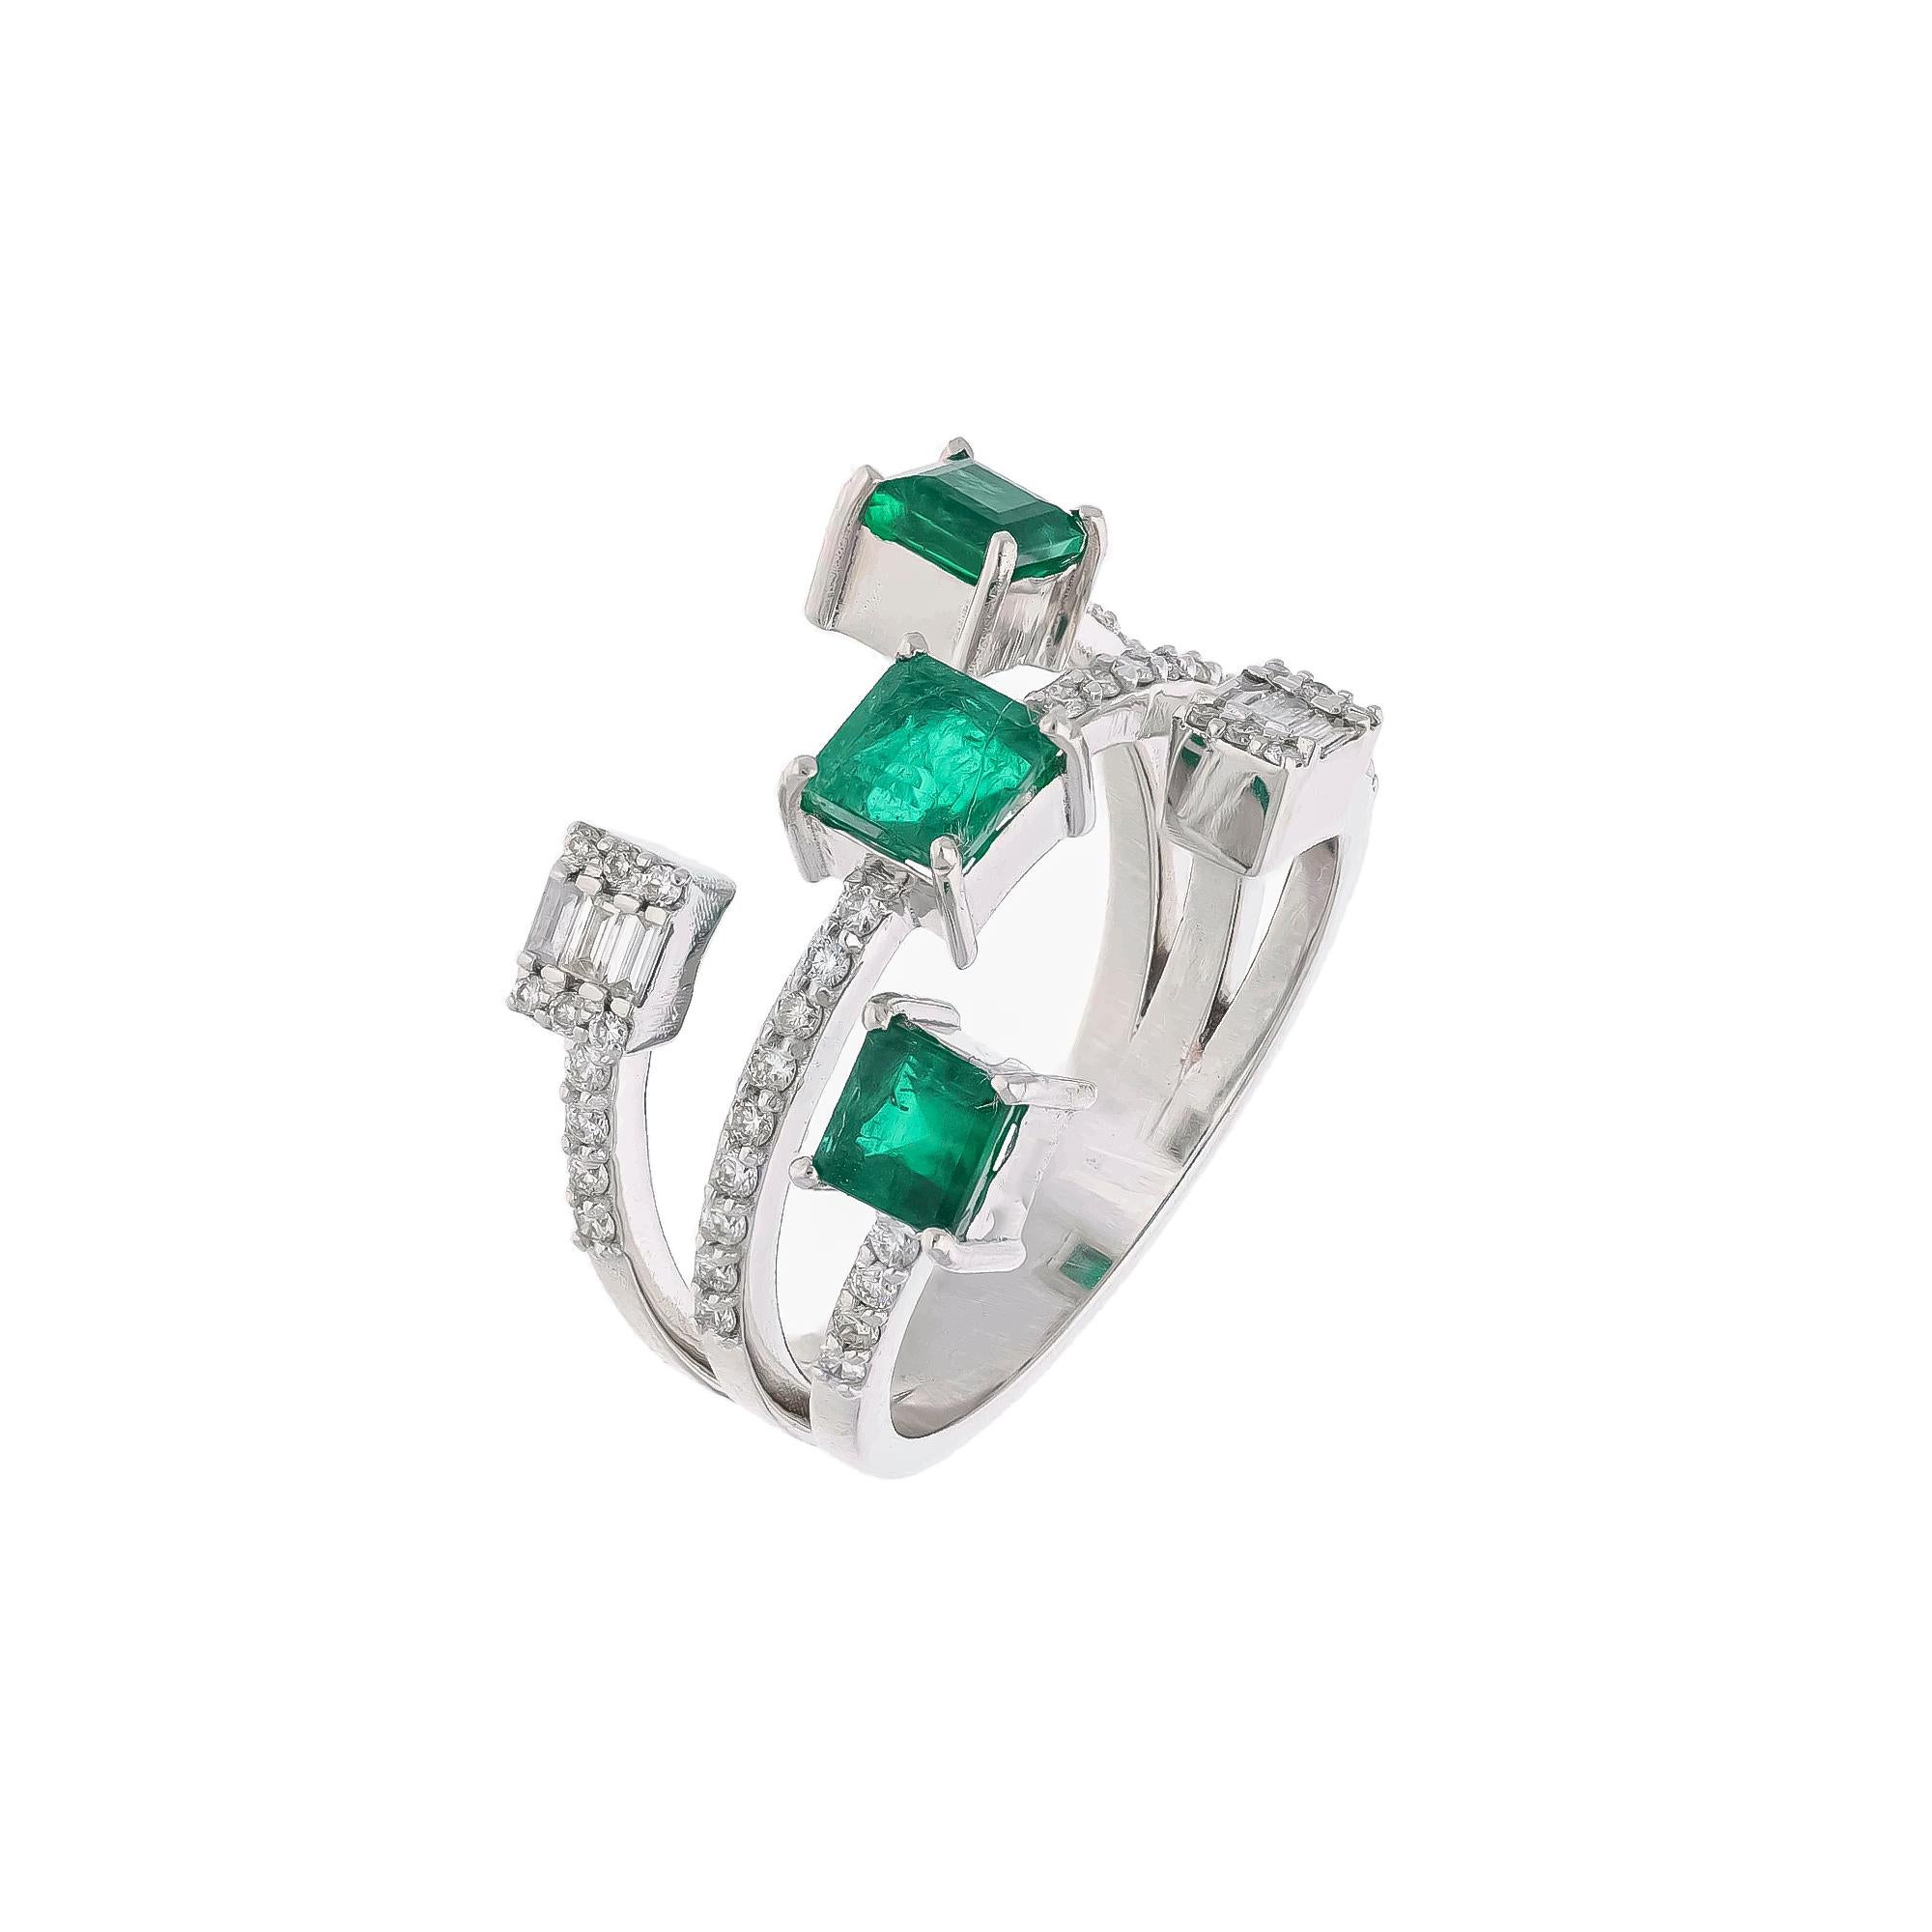 Mixed Cut Natural Emerald Ring with Diamond in 18k Gold